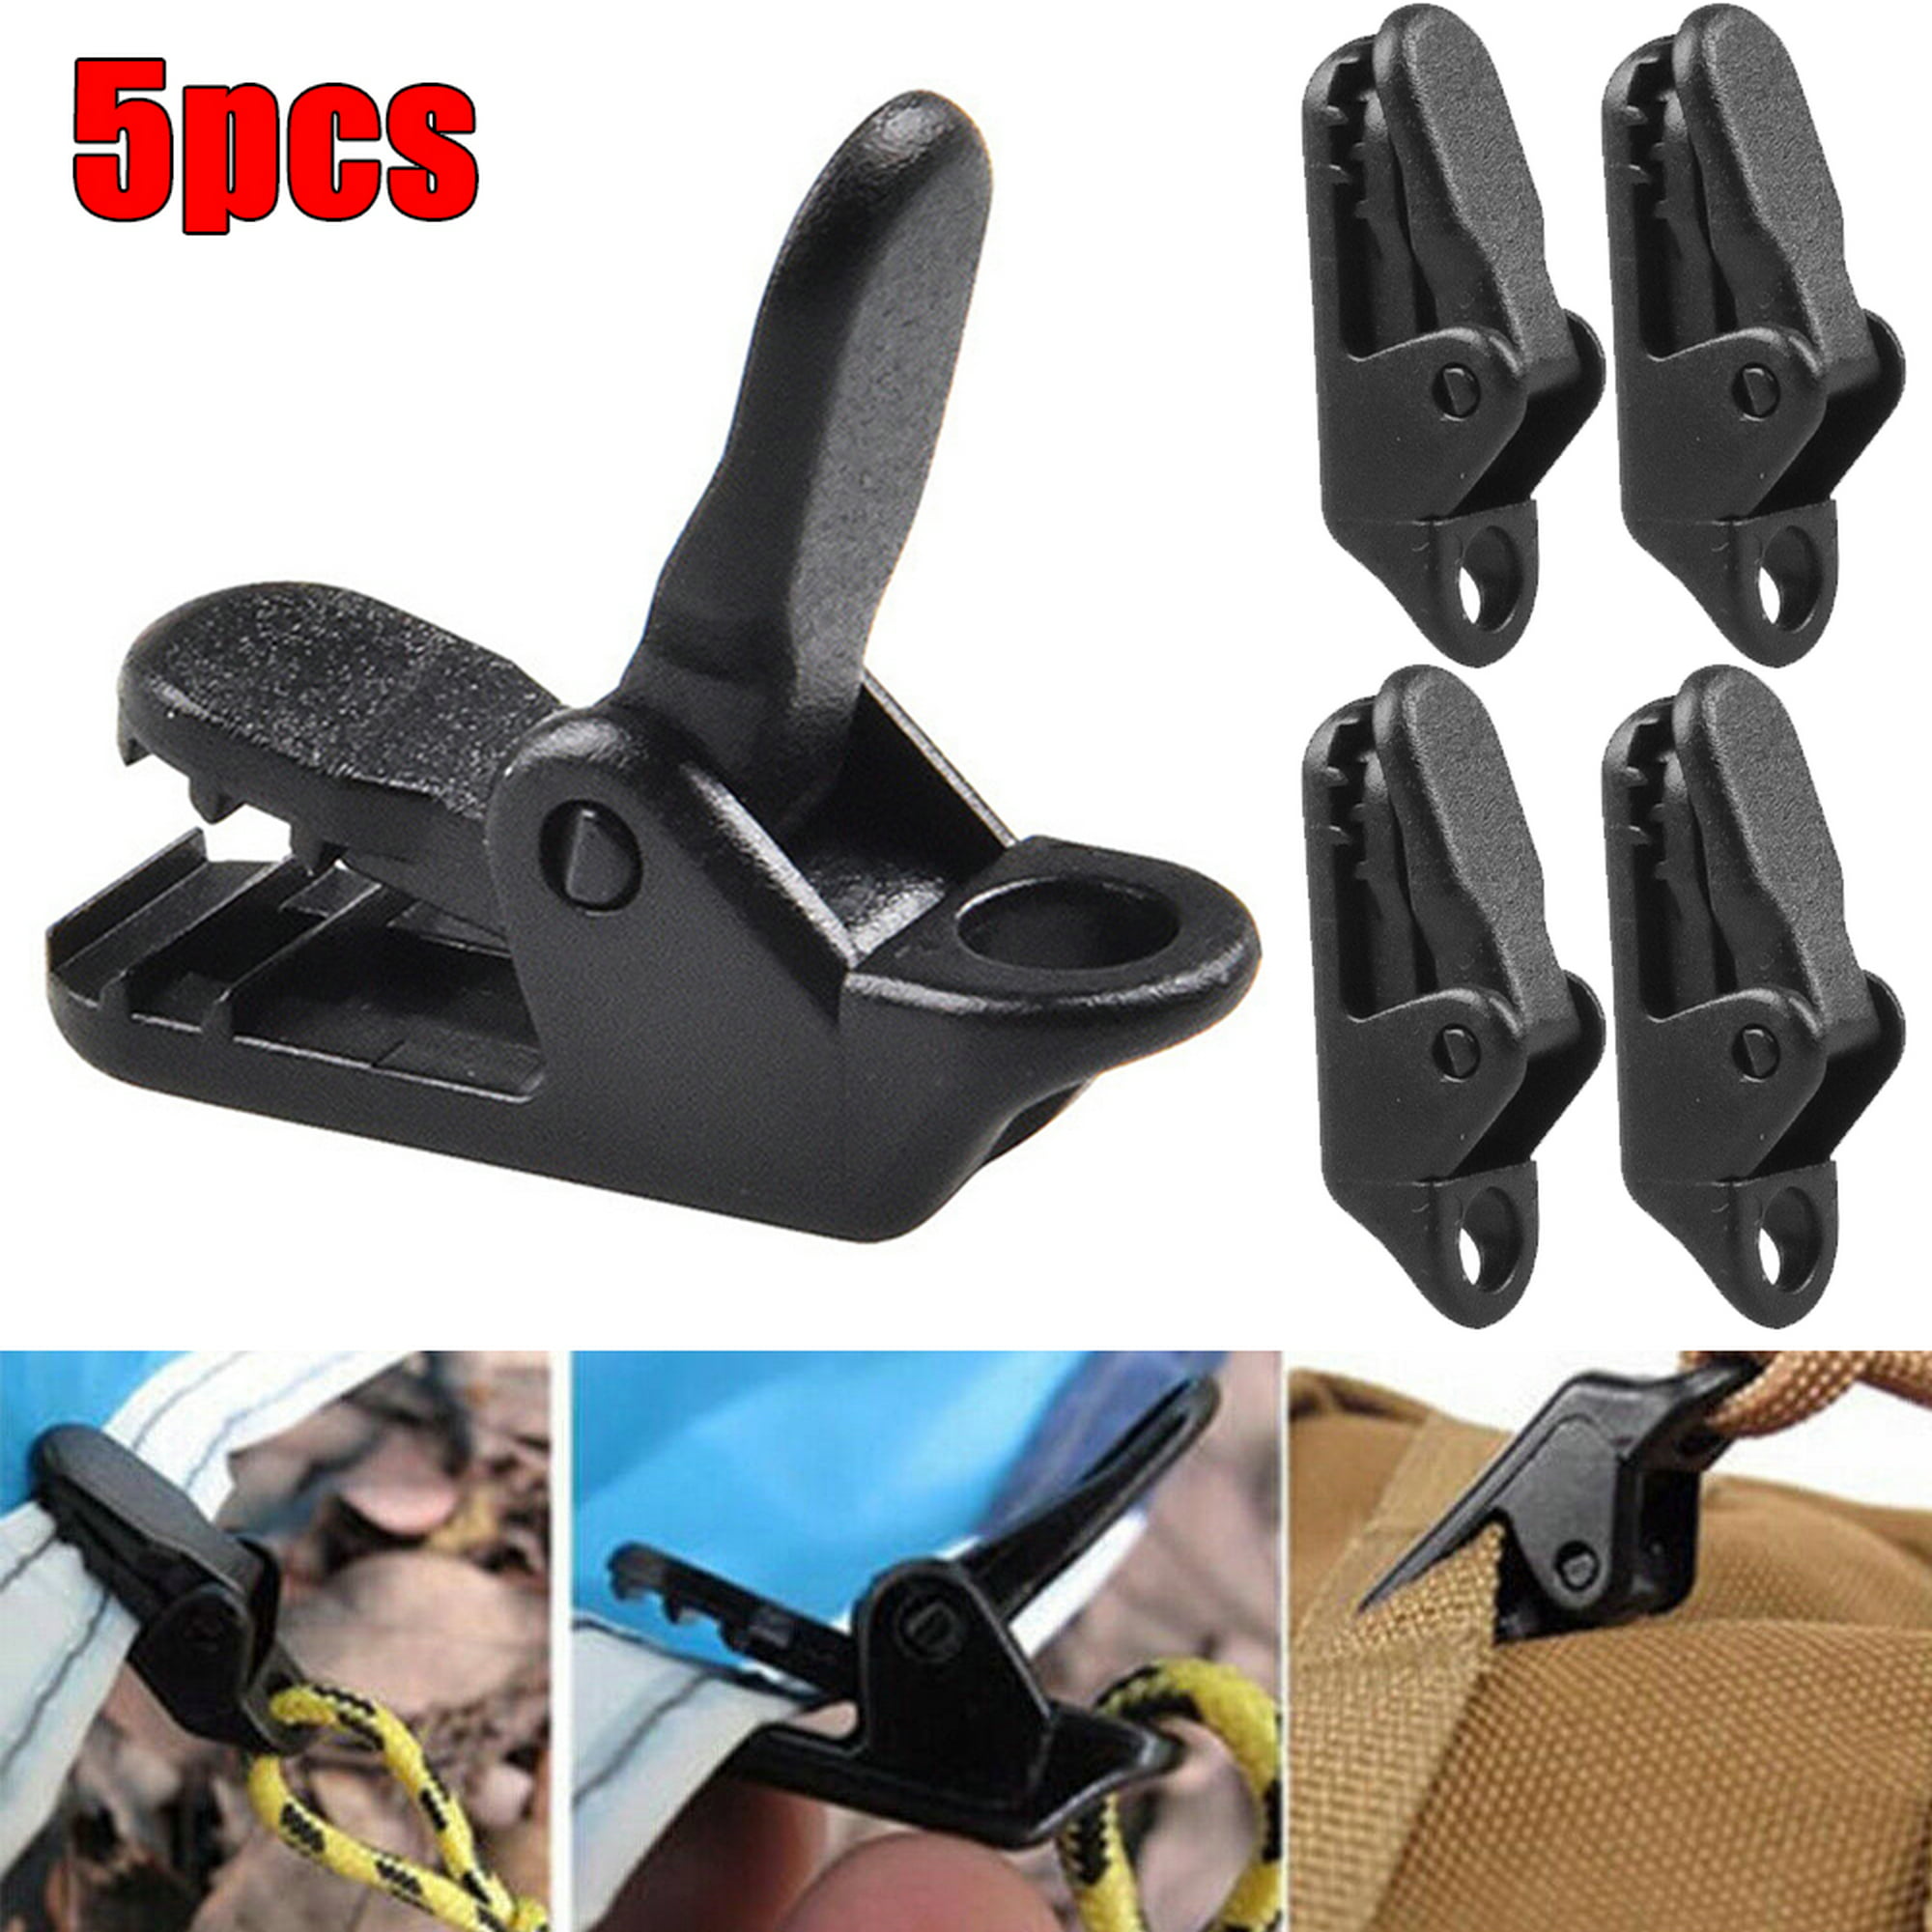 2~20x Camping Awning Canopy Clamp Tarp Clip Car Boat Emergency Tent Tighten Snap